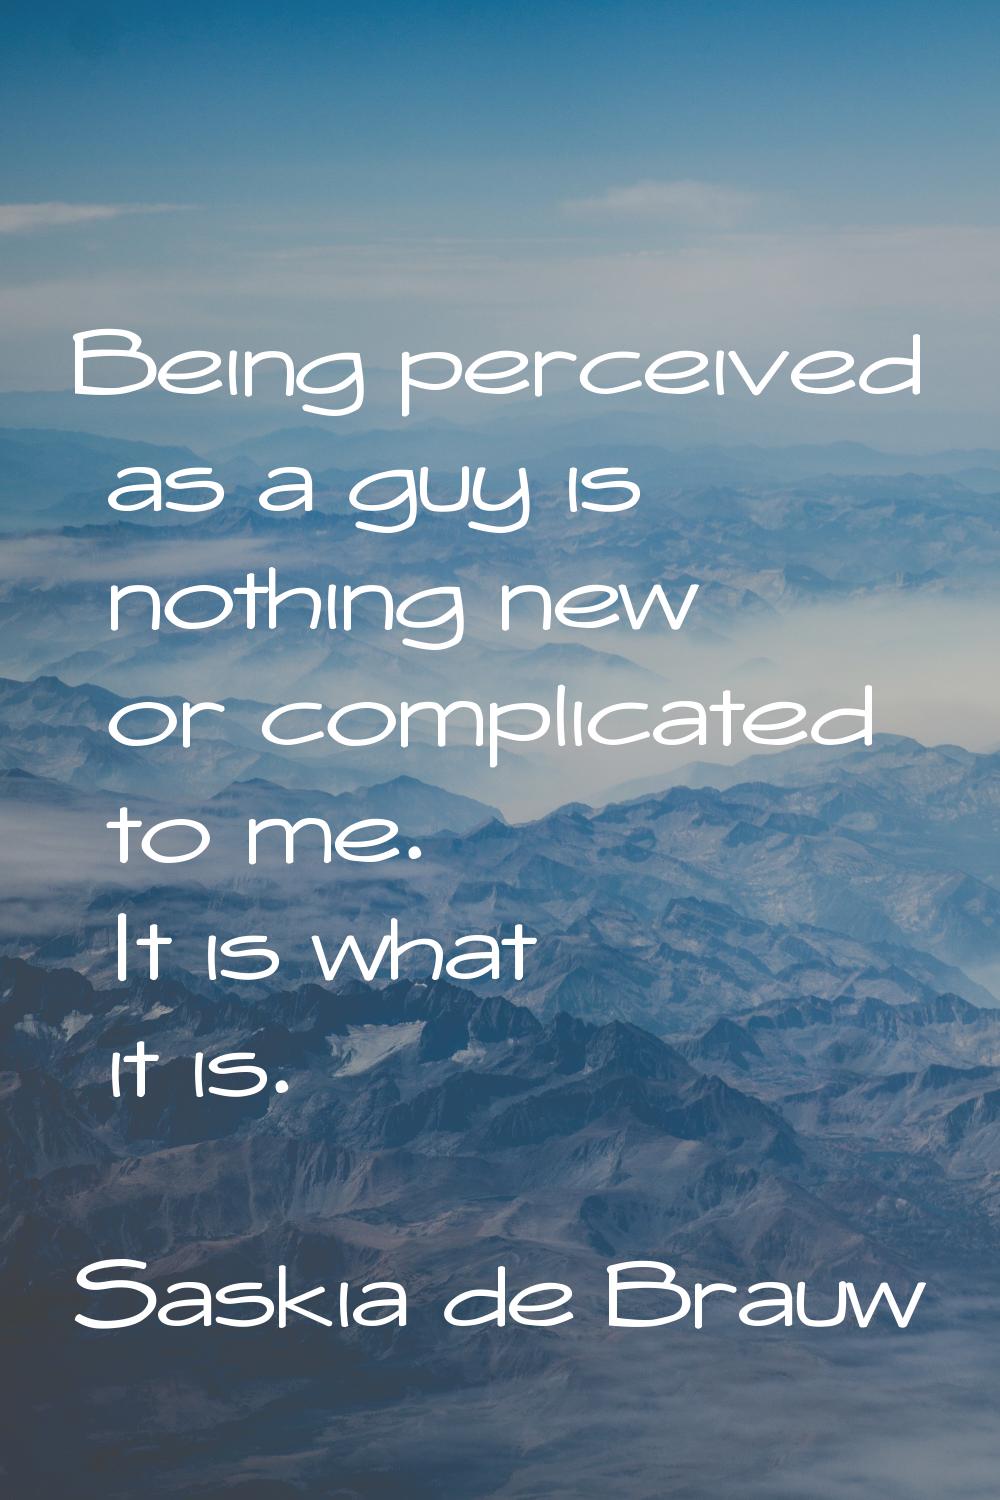 Being perceived as a guy is nothing new or complicated to me. It is what it is.